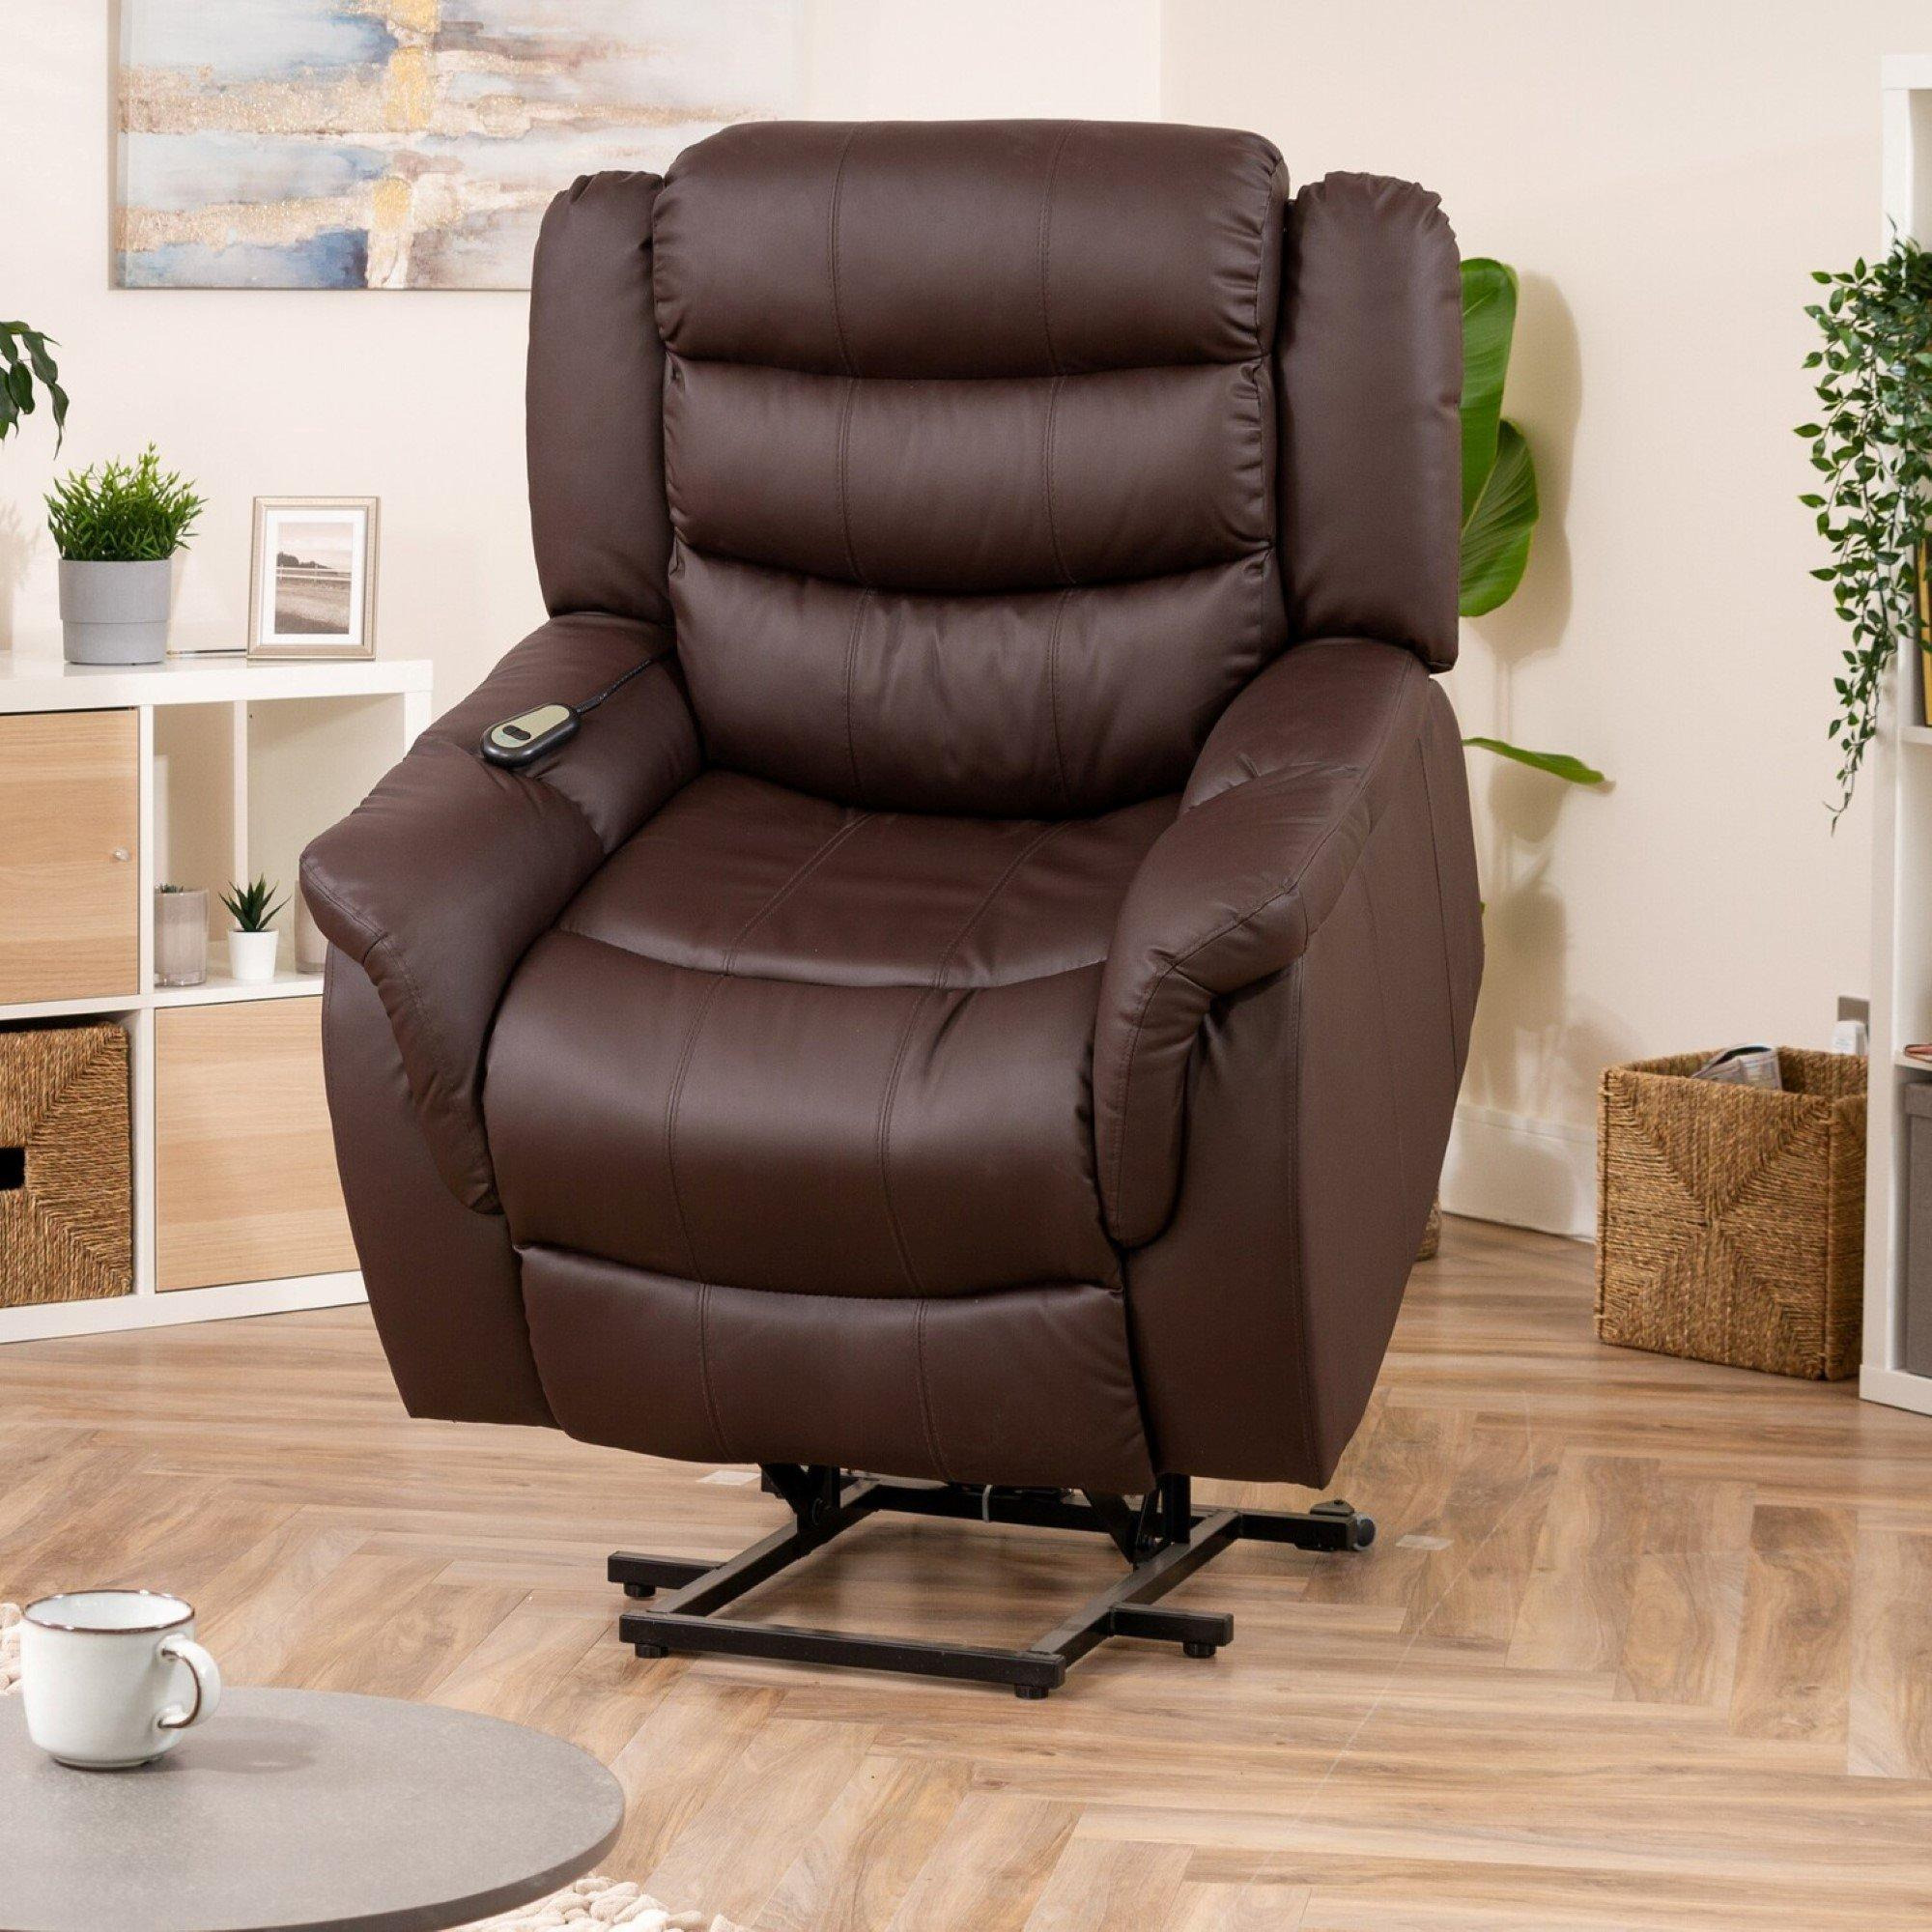 Almeira Electric Riser Recliner with Massage and Heat - image 1